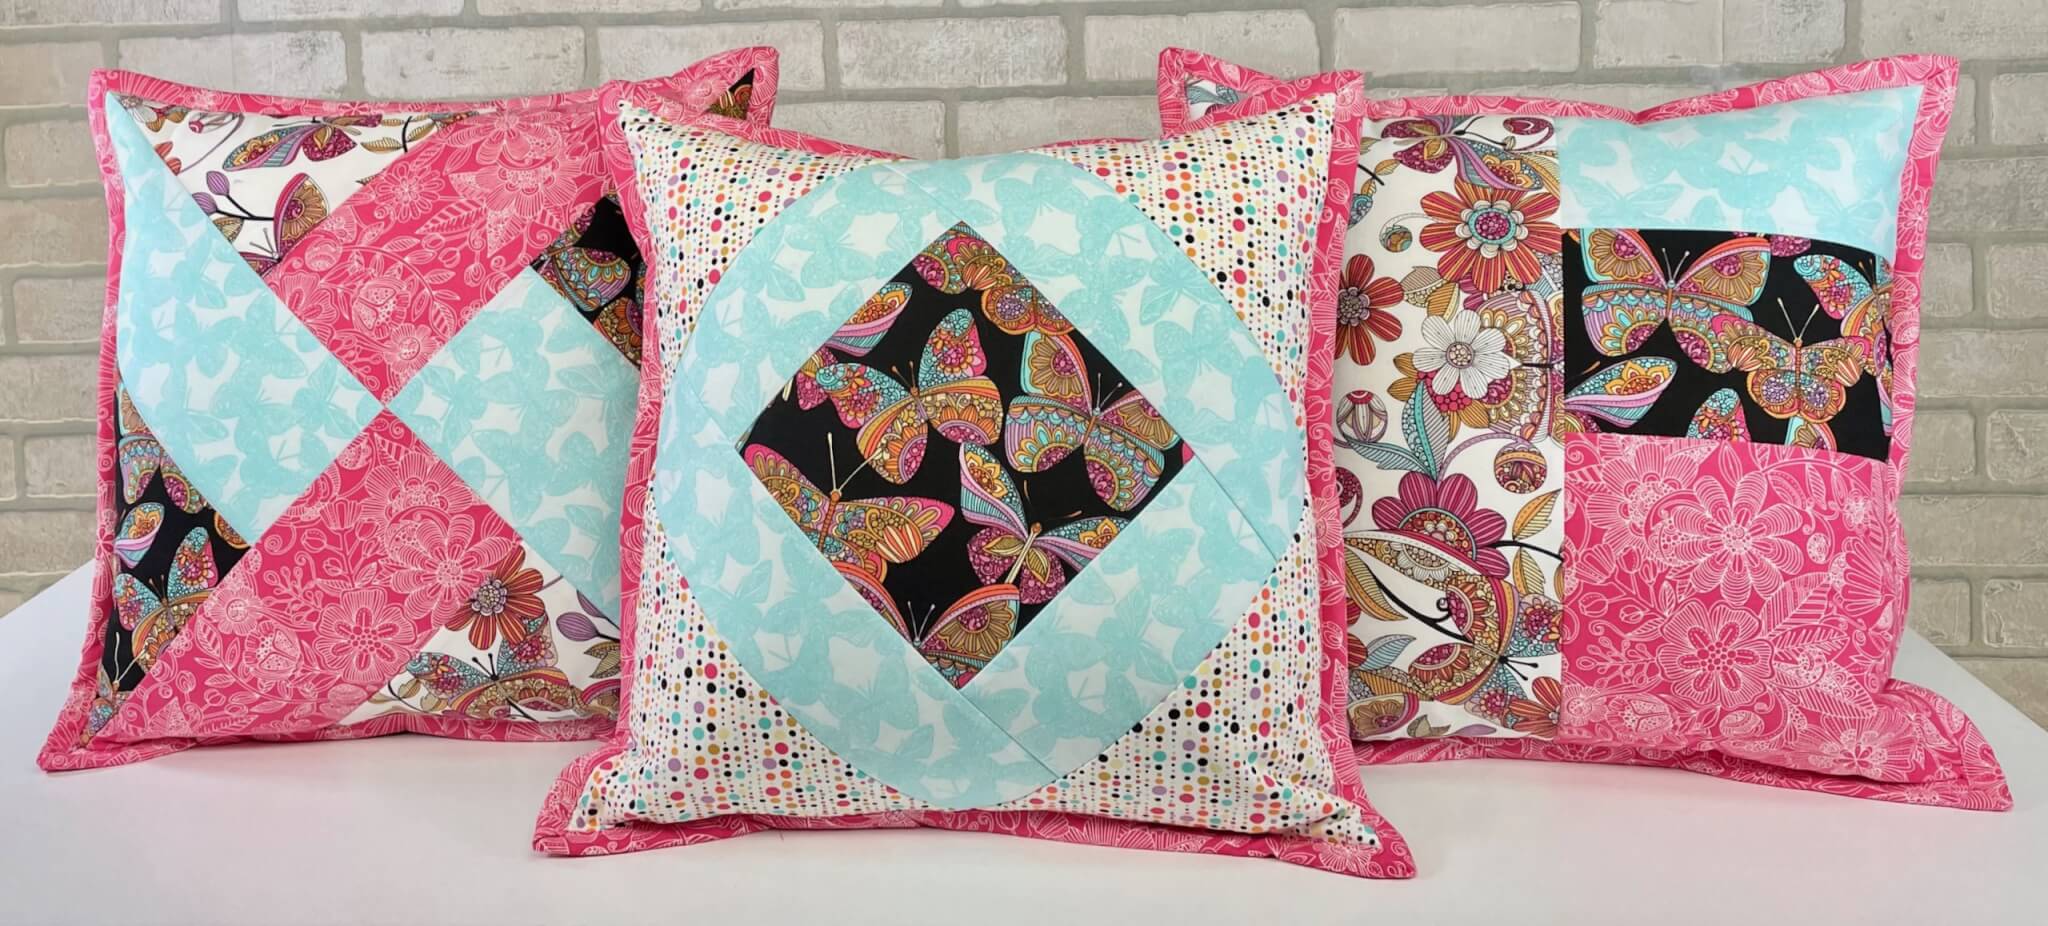 NEW! Zippity-Do-Done Throw Pillows Sewing Tutorial–Plus June Tailor Quilt As You Go Sale Ends Tonight!